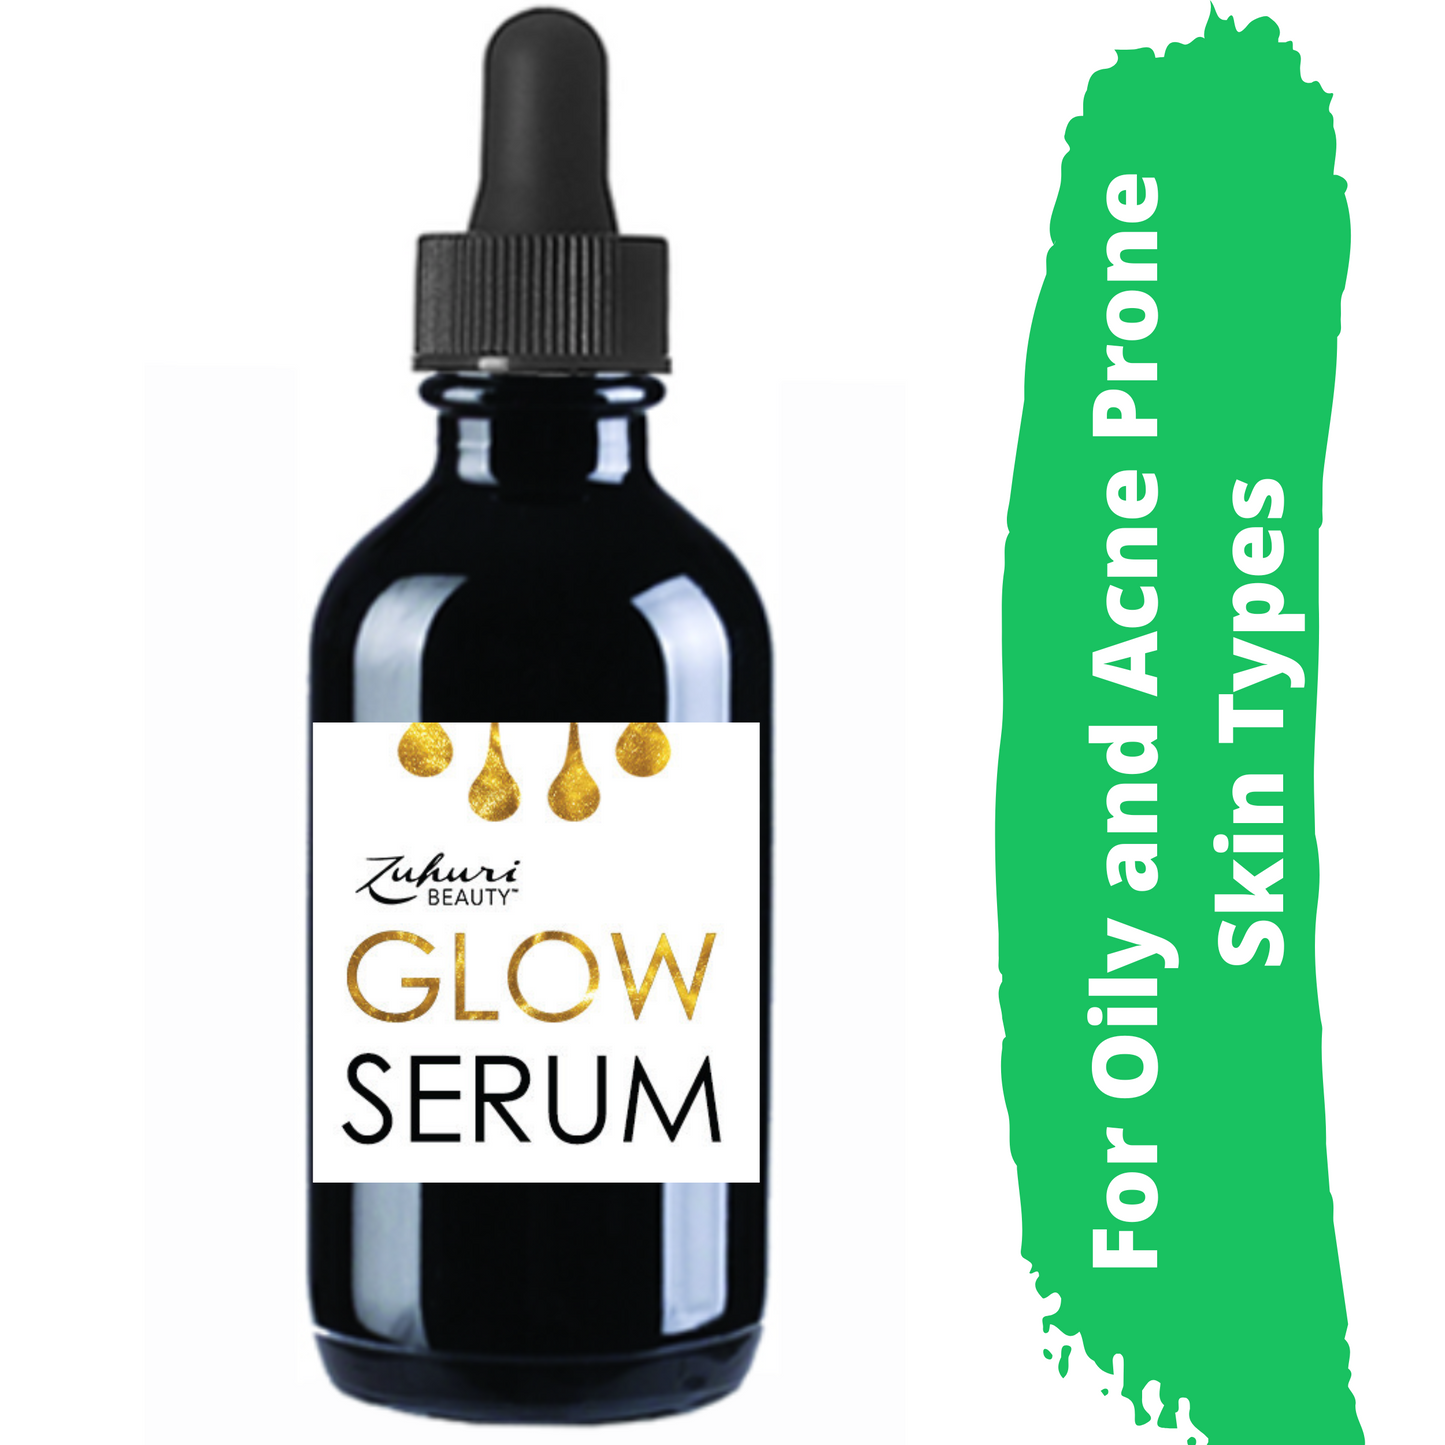 Glow Serum Face Oil for Oily, Combination and/or Acne Prone Skin